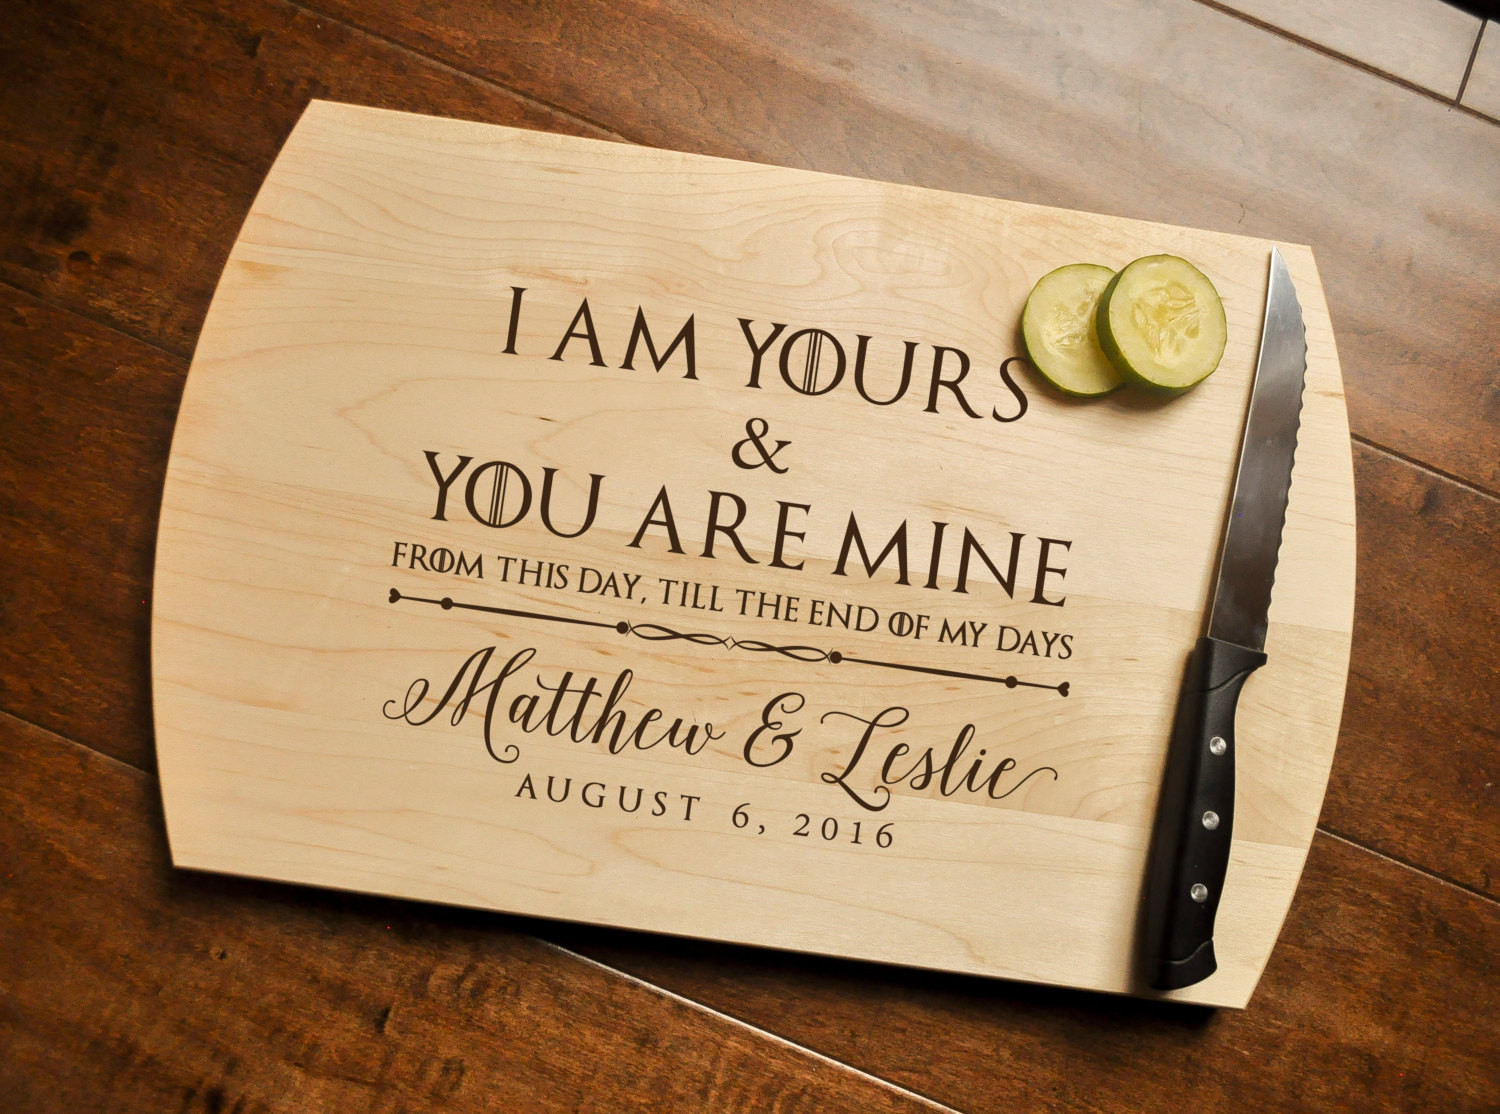 Game Of Thrones Wedding Vows
 Game of Thrones Cutting Board Engraved Cutting Board GoT